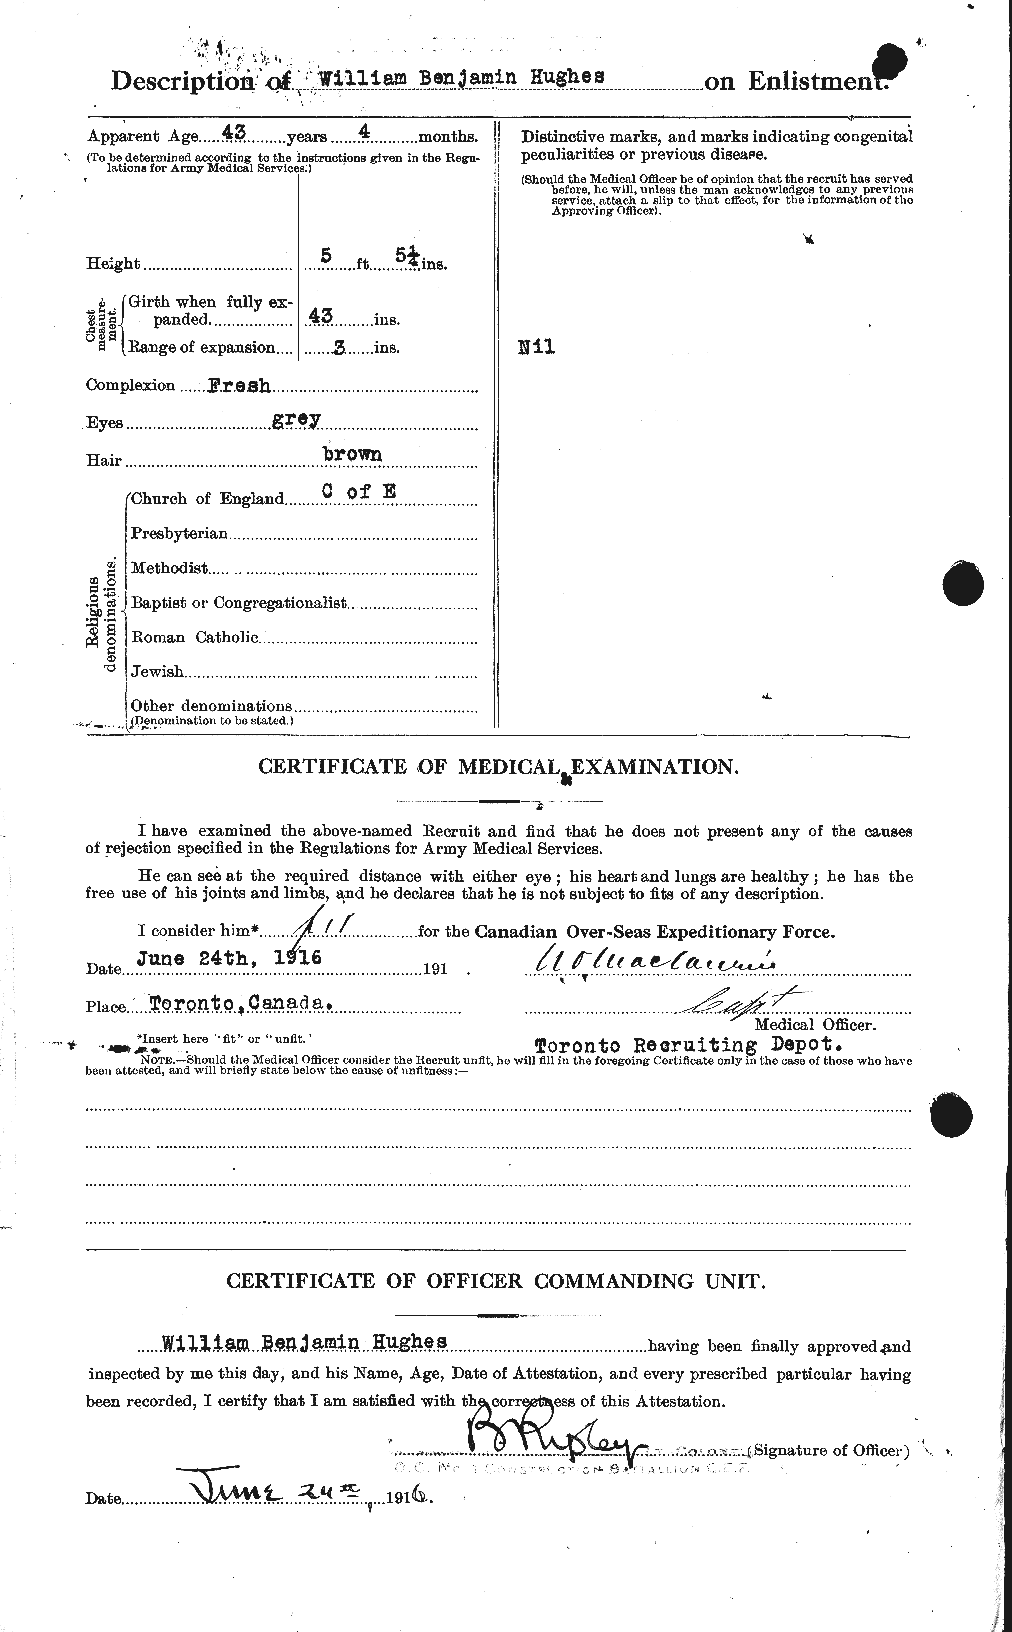 Personnel Records of the First World War - CEF 405911b